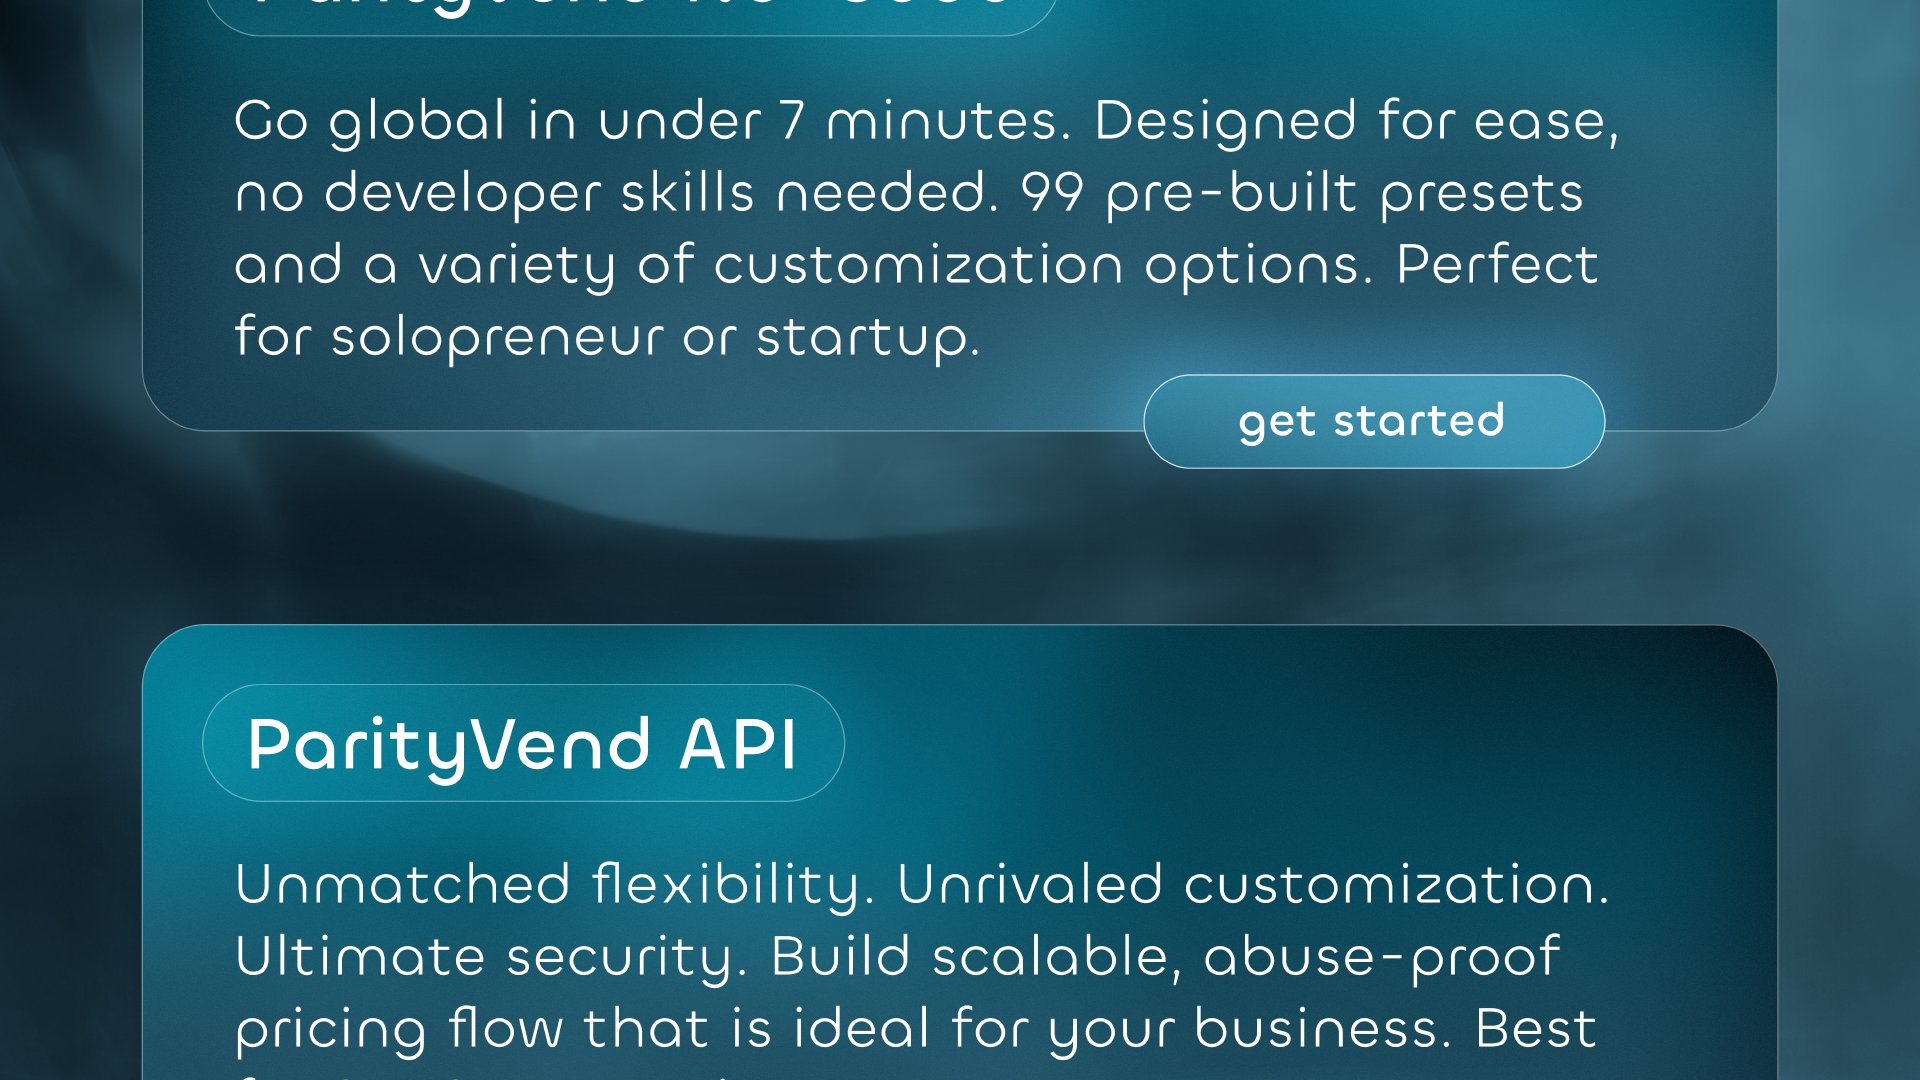 ParityVend No-Code: Go global in under 7 minutes. Designed for ease, no developer skills needed. 99 pre-built presets, a variety of customization options. Perfect for solopreneur or startup. ParityVend API: Unmatched flexibility, unrivaled customization, ultimate security. Build scalable, abuse-proof pricing flow that is ideal for your business. Best for SaaS, enterprise, startup.